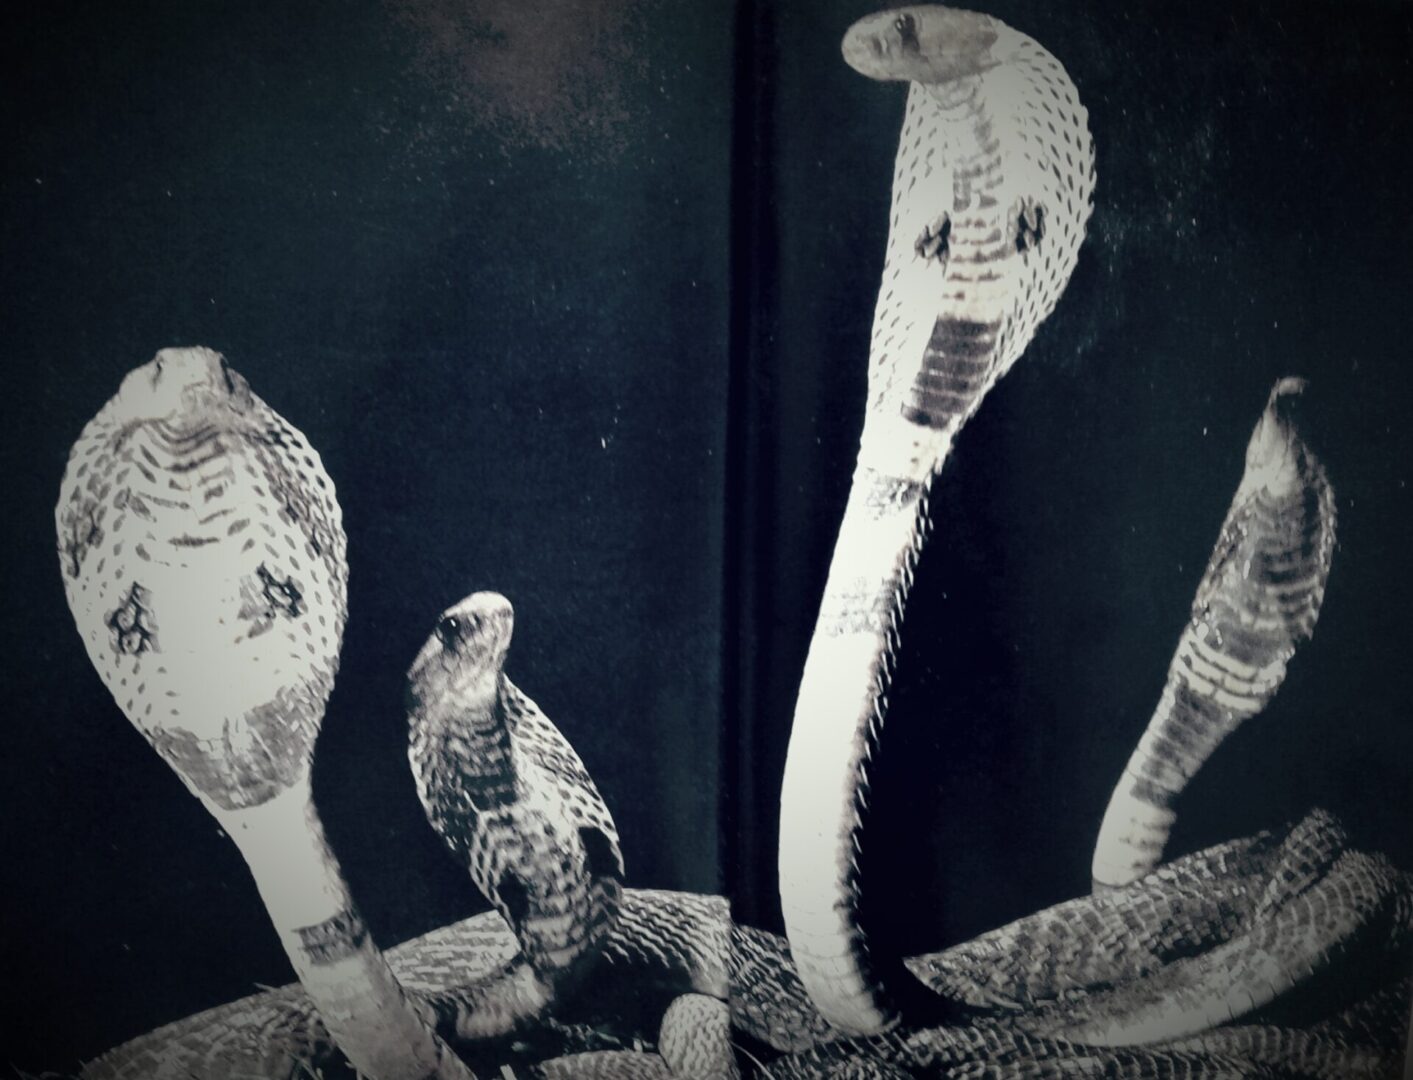 The only snake able to stand a third of its length, the king cobra, which can grow to 26 feet (and brings to a close the narrative of the novel), could tower above John Wayne.